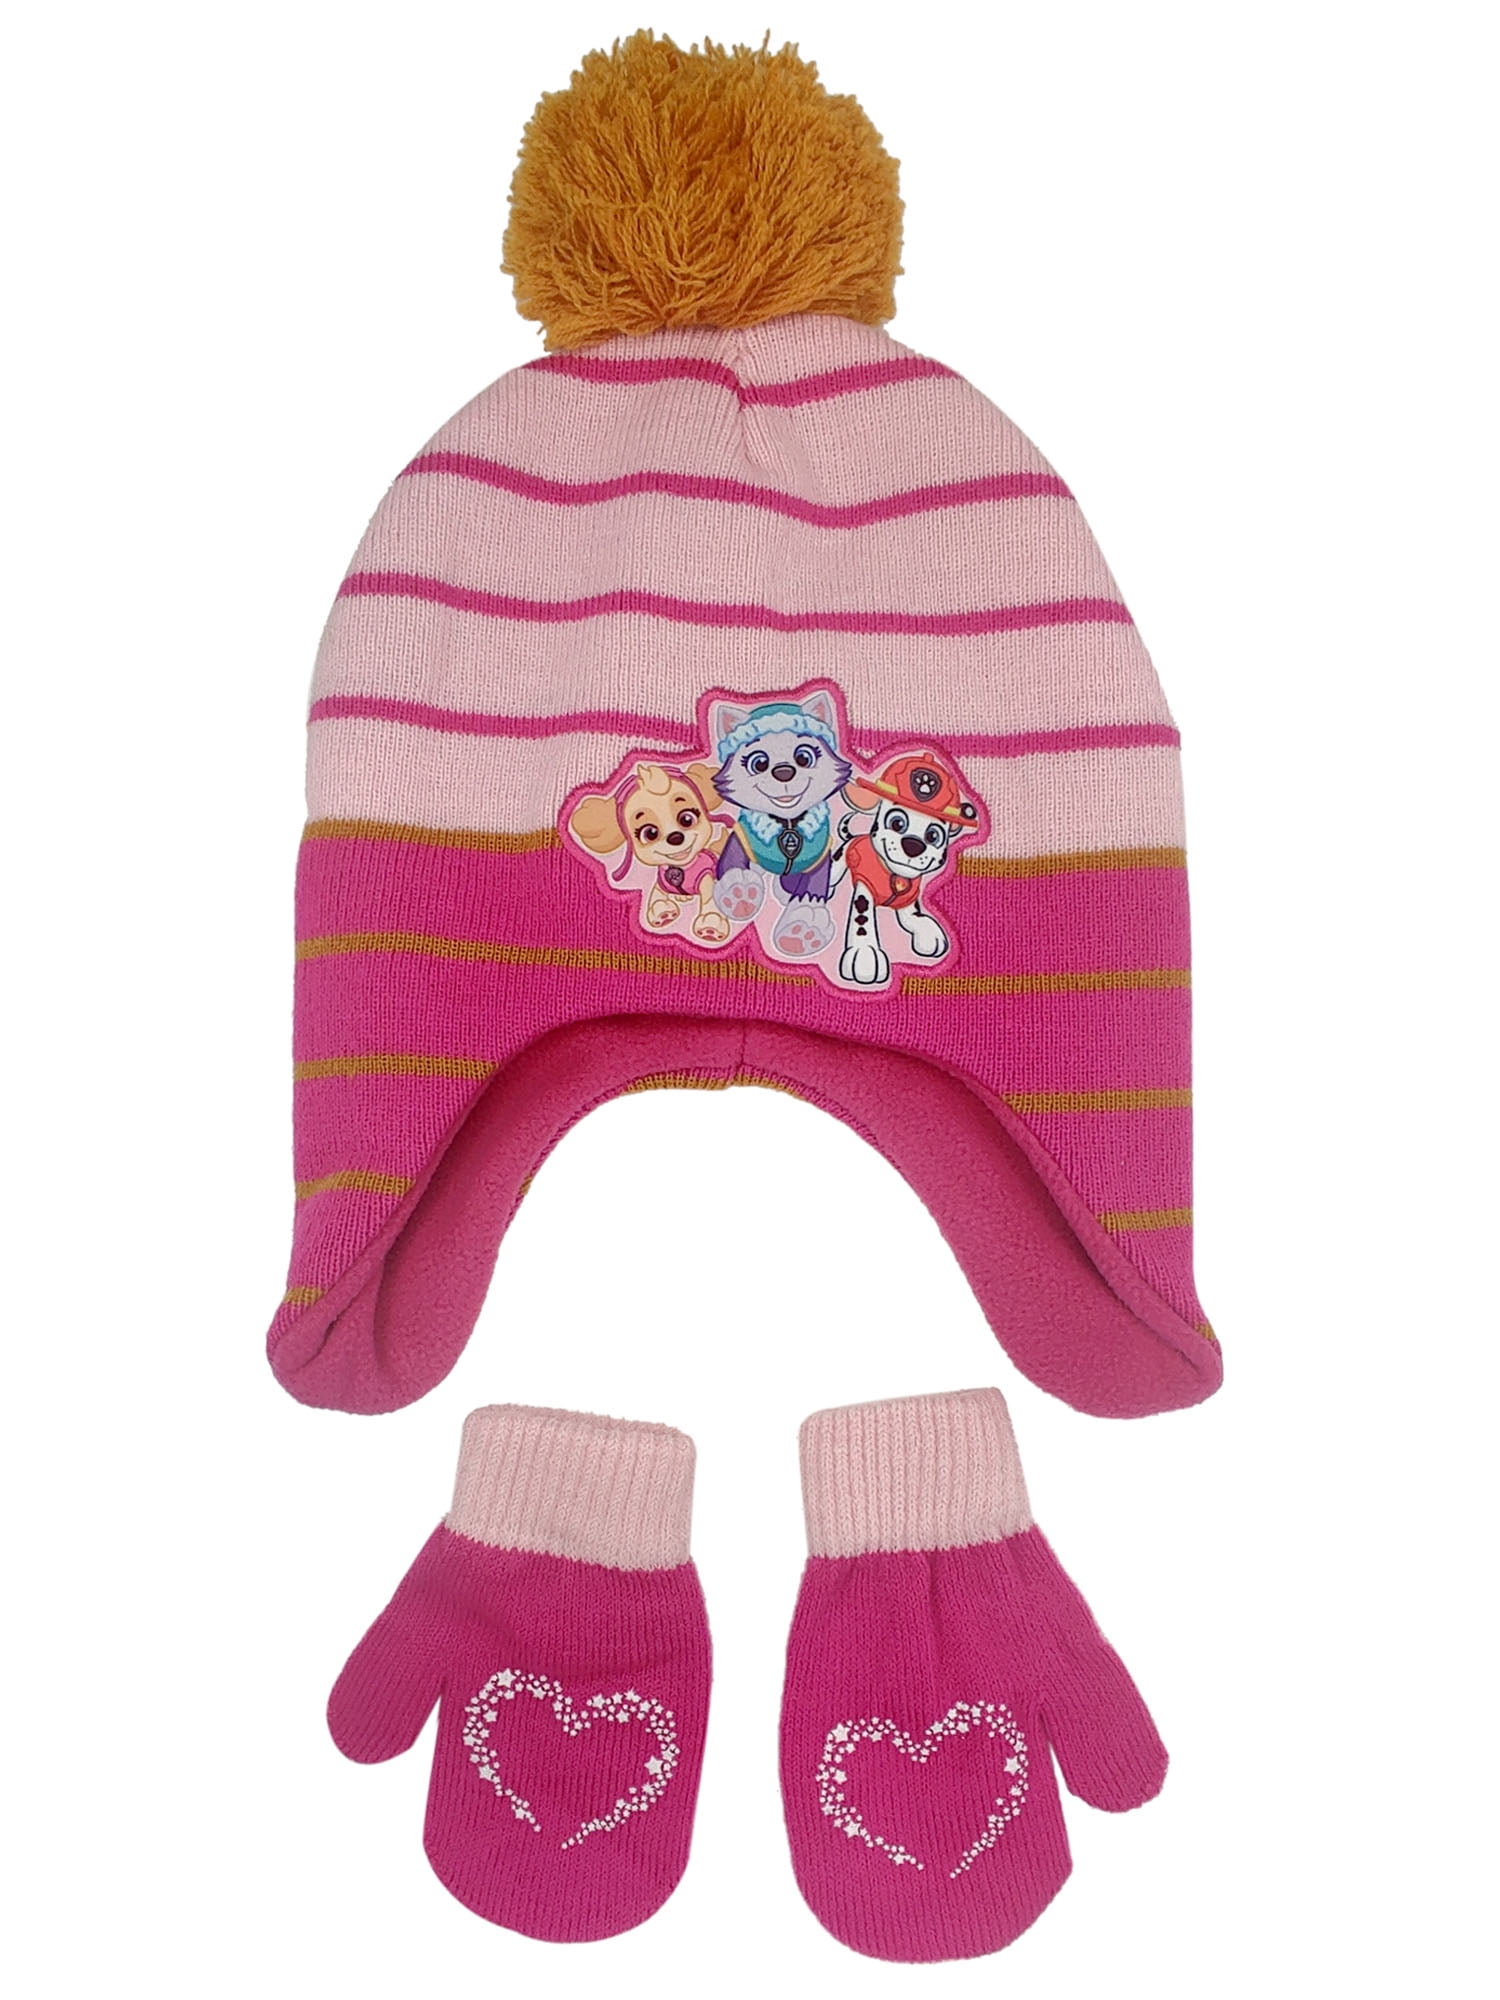 Paw Patrol Skye and Everest Winter Beanie Hat and Gloves Set 